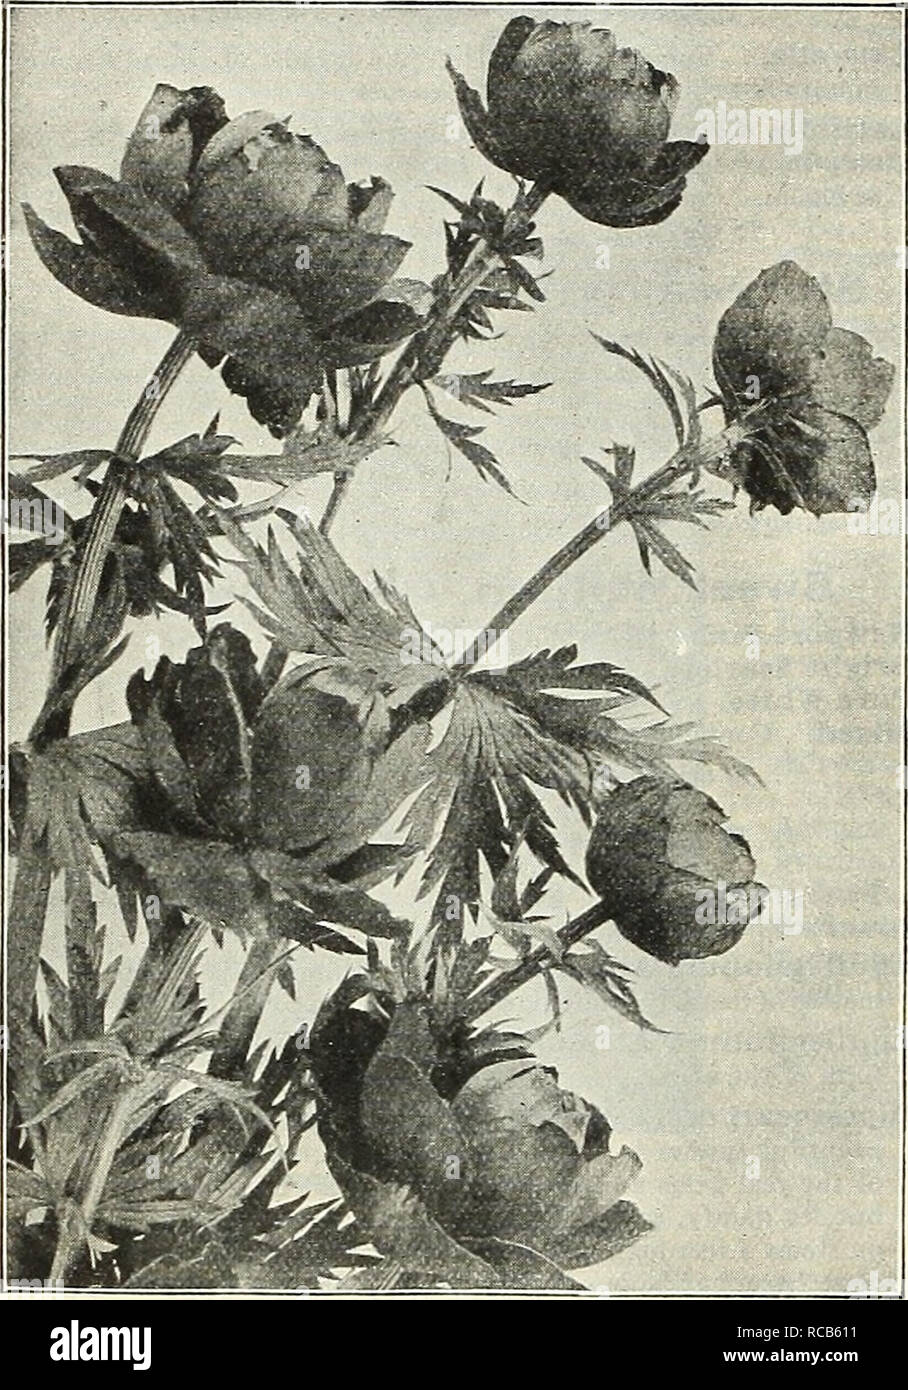 . Dreer's autumn catalogue 1929. Bulbs (Plants) Catalogs; Flowers Seeds Catalogs; Gardening Equipment and supplies Catalogs; Nurseries (Horticulture) Catalogs; Vegetables Seeds Catalogs. 46 /flEHEyA-DBEEH^ HARDY PERENNIAL PIANTS &gt;HILMEliPHRli. Trollius or Globe Flower Trillium (Wood Lily or Wake Robin) Grandiflorum. Excellent plants for shady positions in the hardy border, or in a subaquatic position. Large white flowers in early spring. 15 cts. each; §1.50 per doz.; S8.00 per 100. Tunica Sazifrag^a. A pretty tufted plant with light pink flowers; pro- duced all summer; useful either for ro Stock Photo